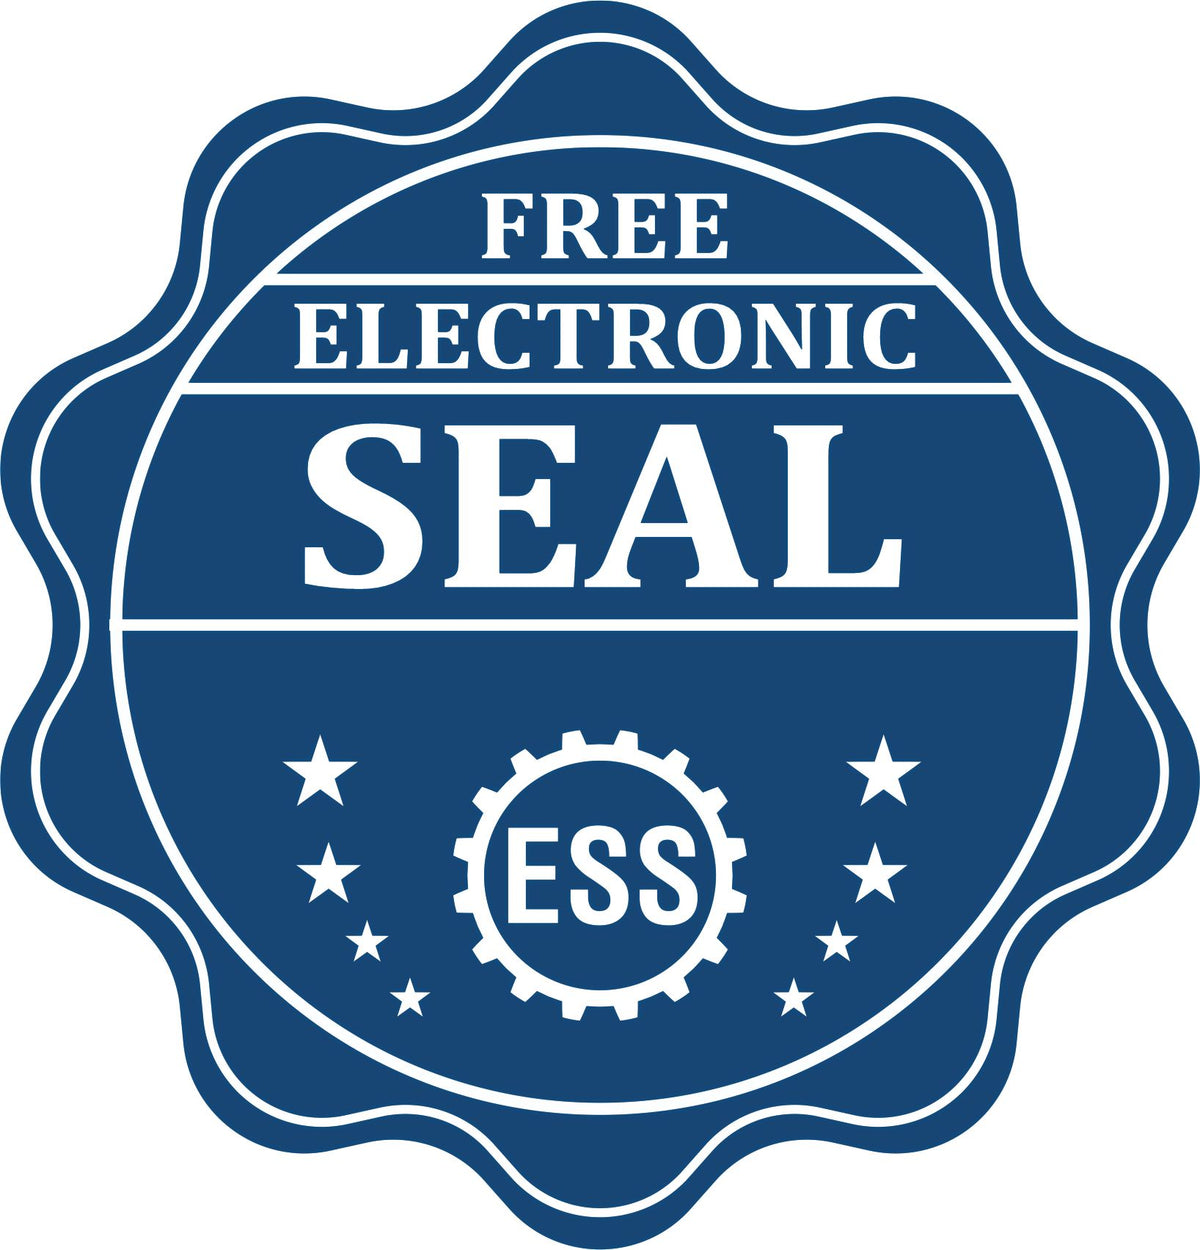 A badge showing a free electronic seal for the Heavy-Duty Ohio Rectangular Notary Stamp with stars and the ESS gear on the emblem.